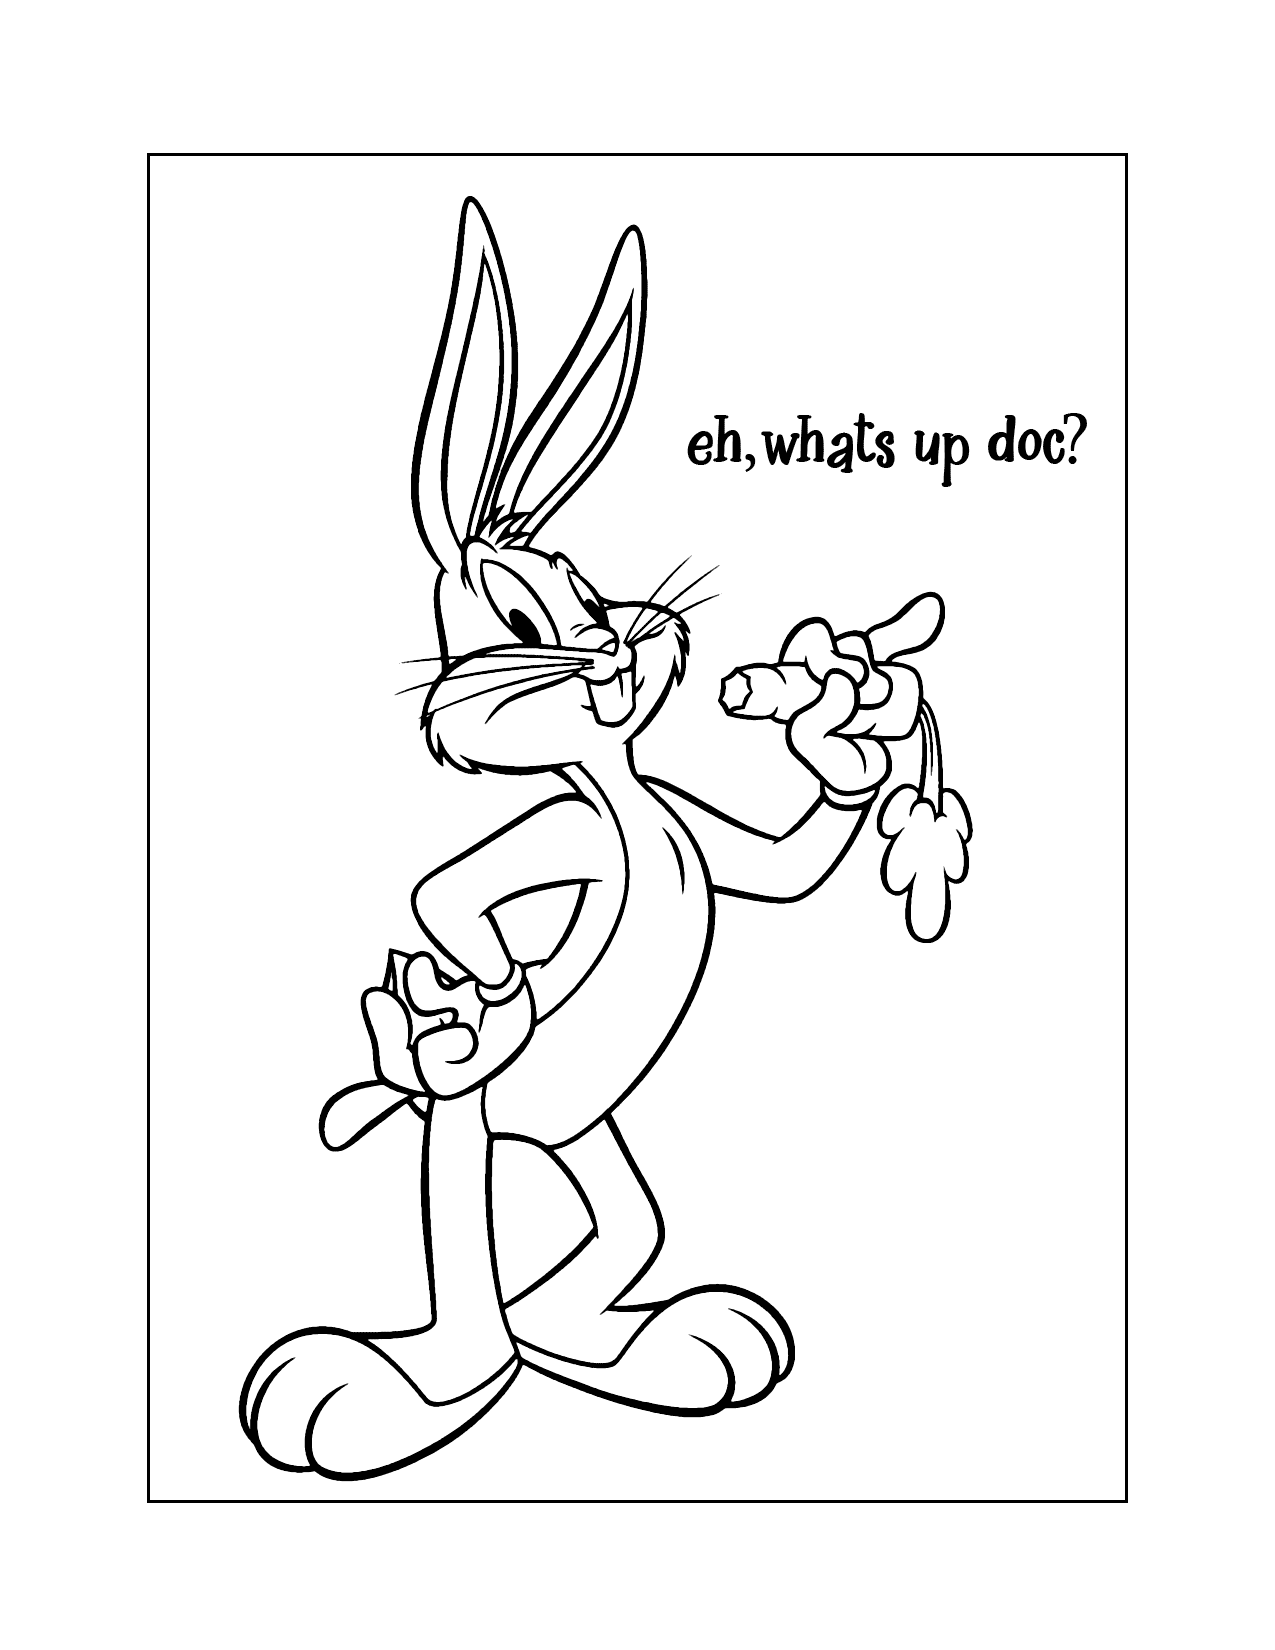 Whats Up Bugs Bunny Coloring Page